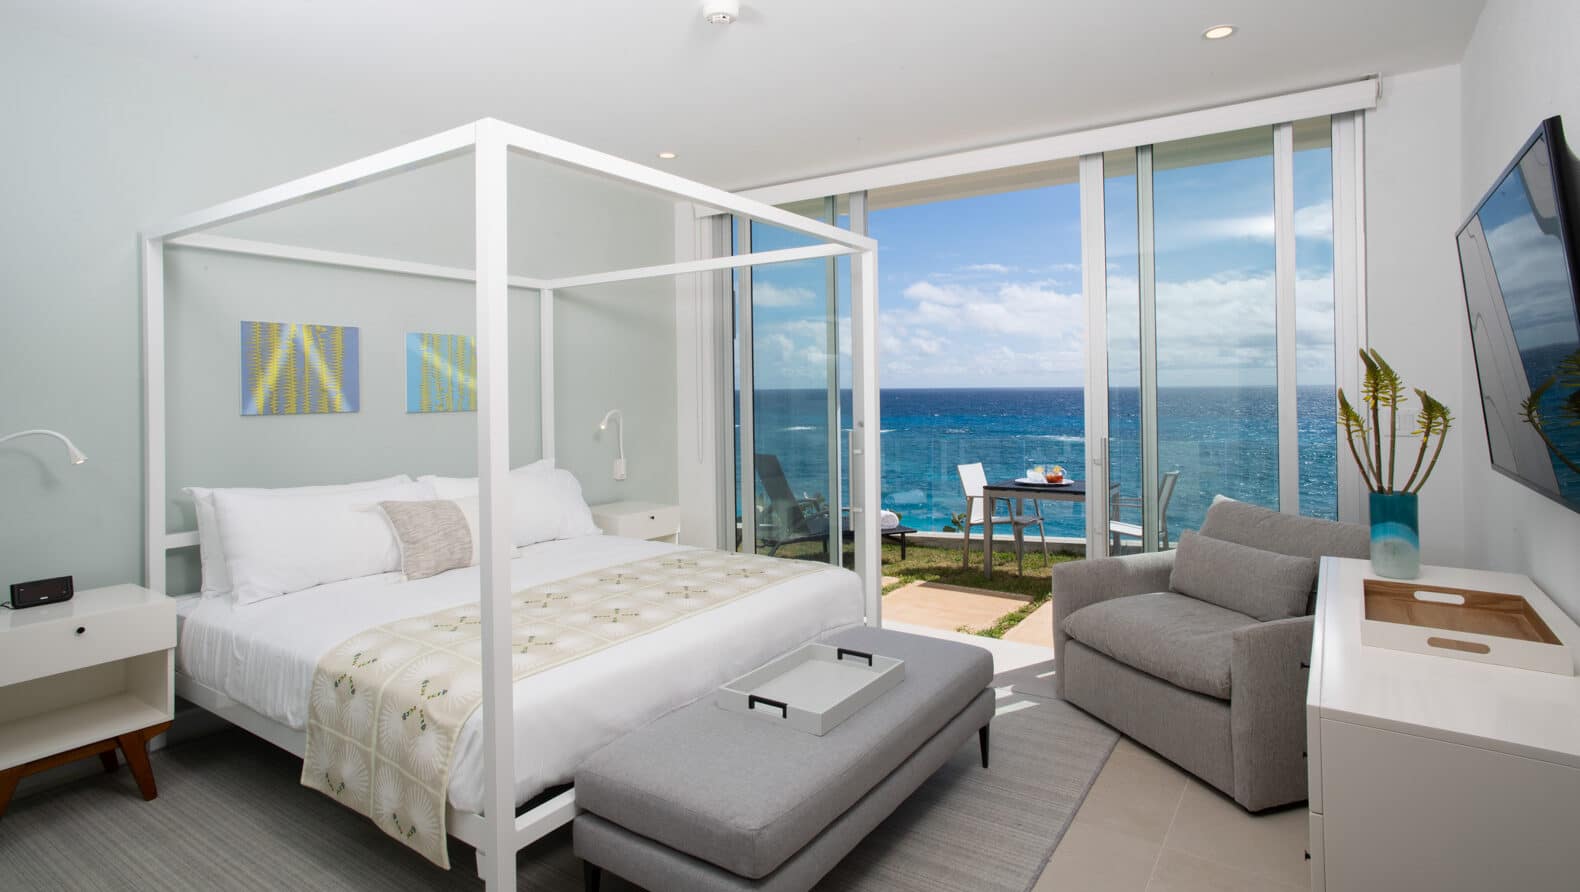 A bedroom with a canopy bed and large glass doors with an ocean view.